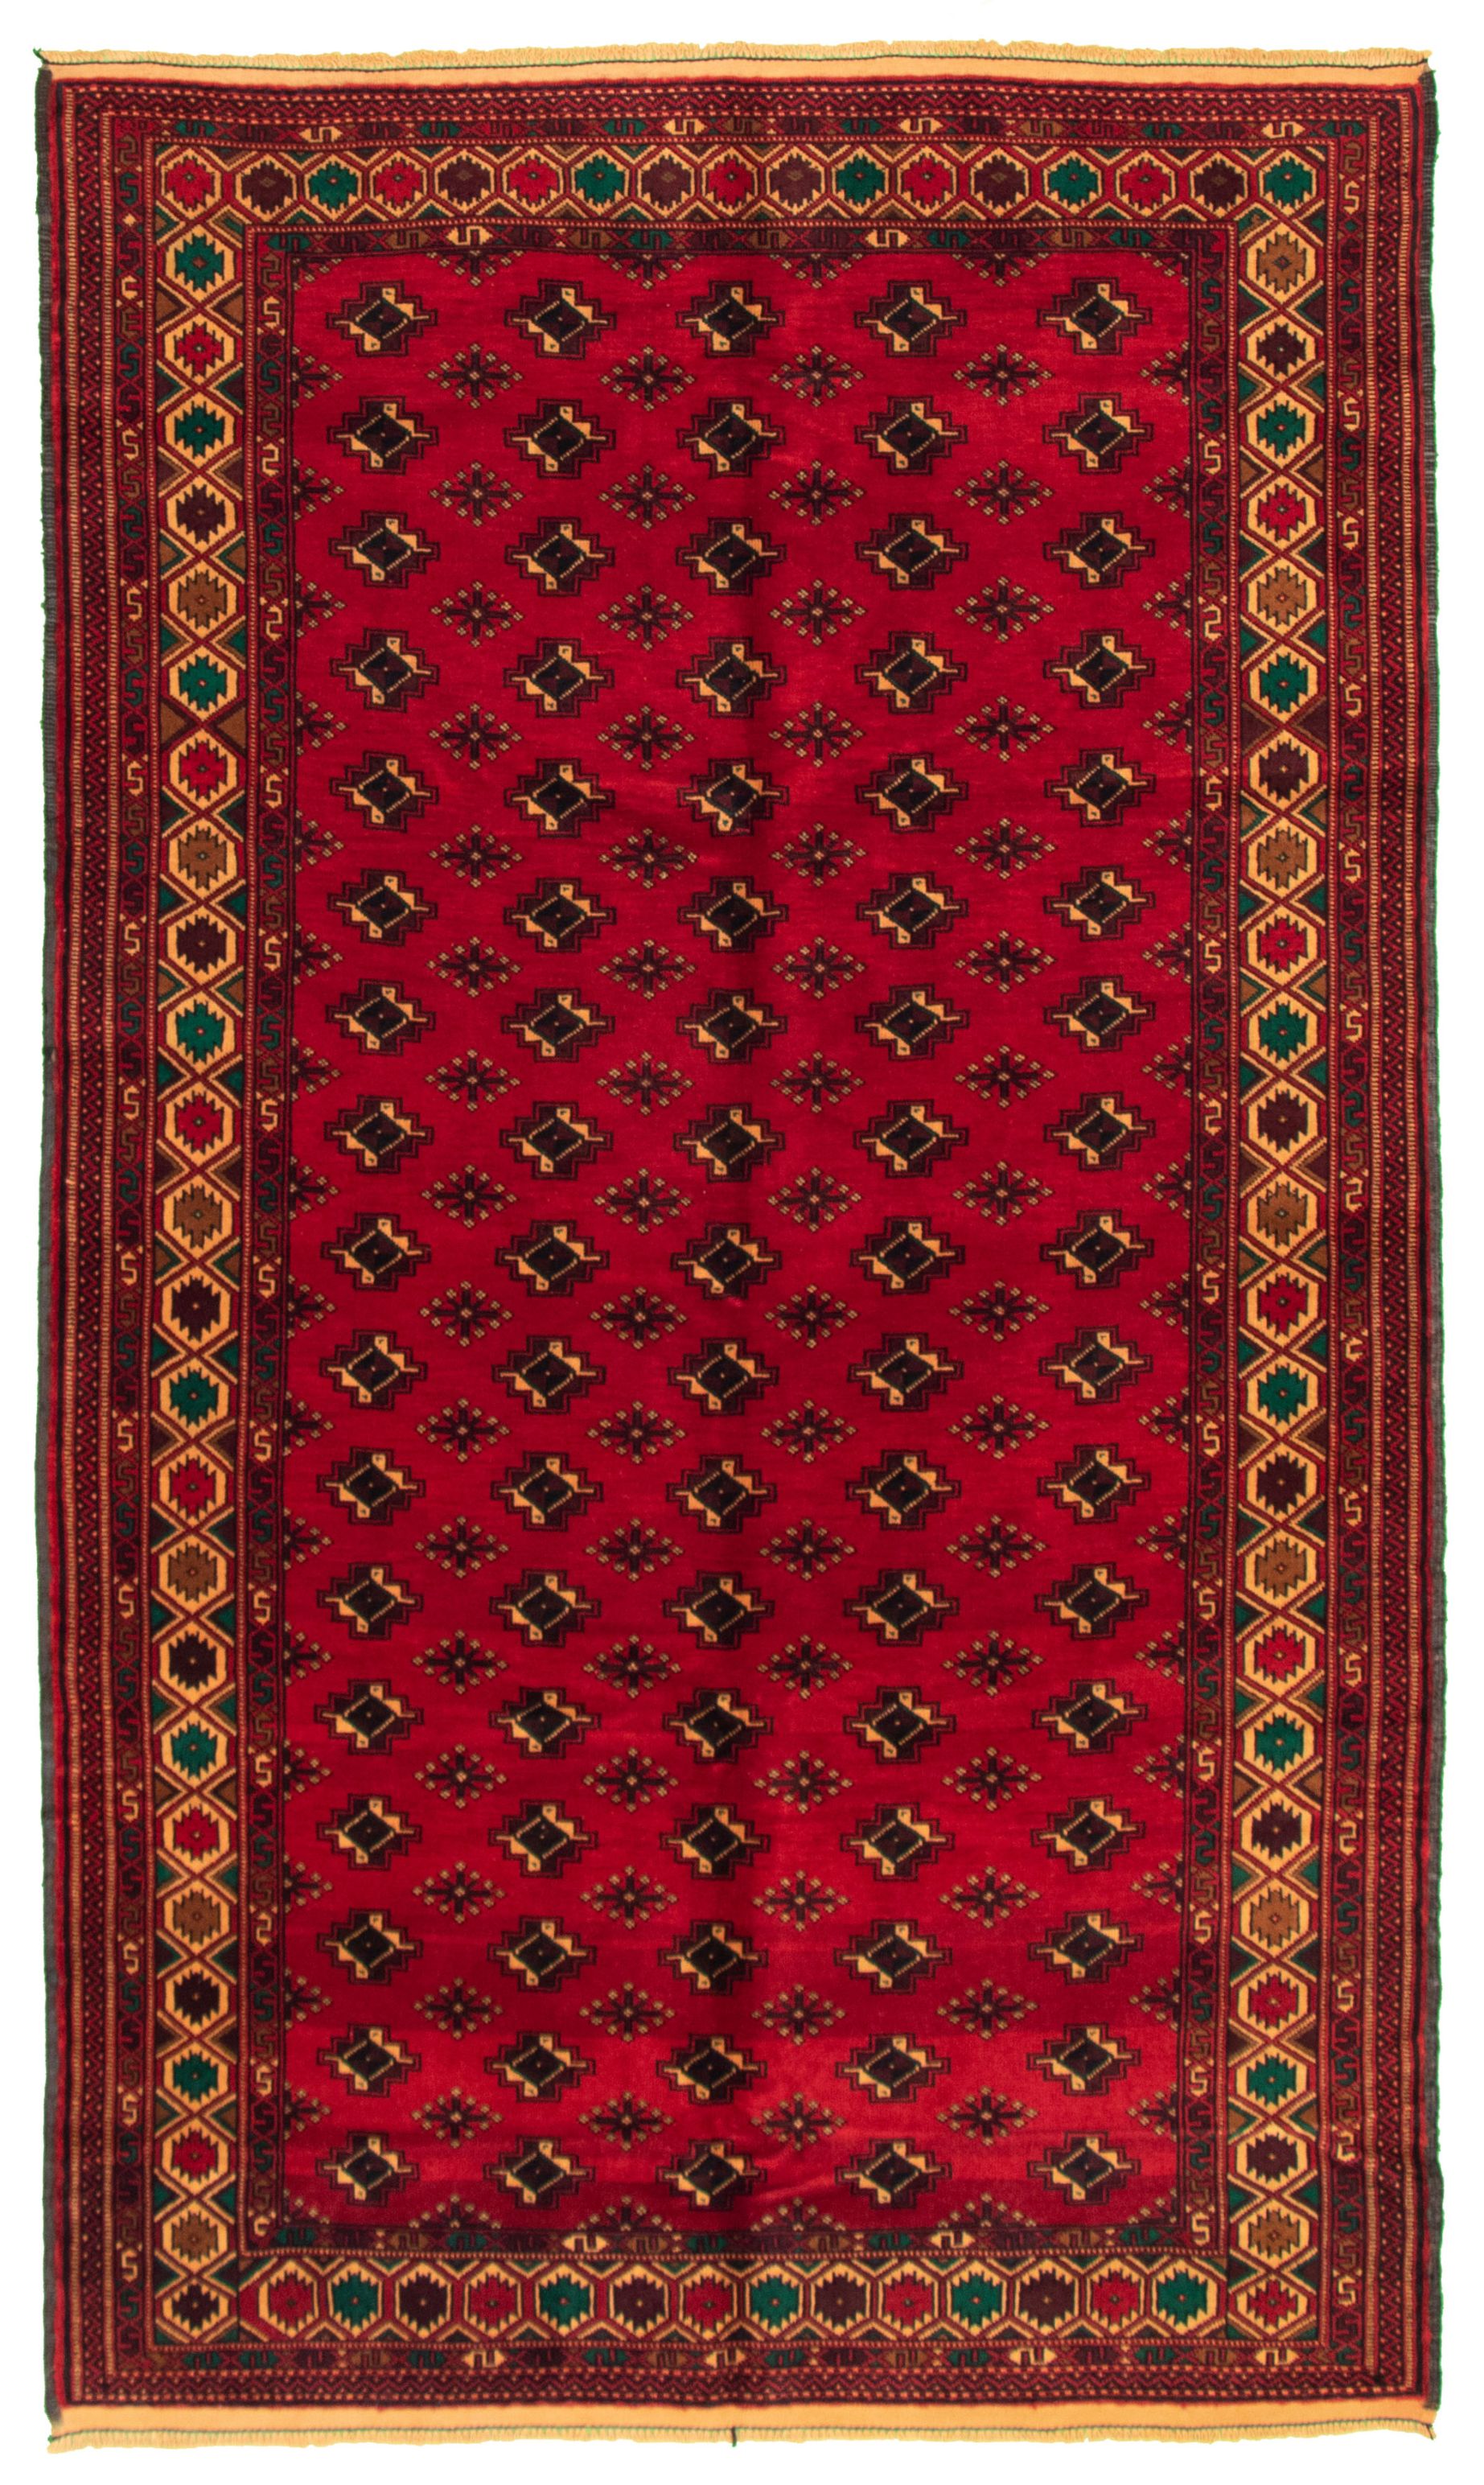 Hand-knotted Teimani Red Wool Rug 5'4" x 8'10" Size: 5'4" x 8'10"  